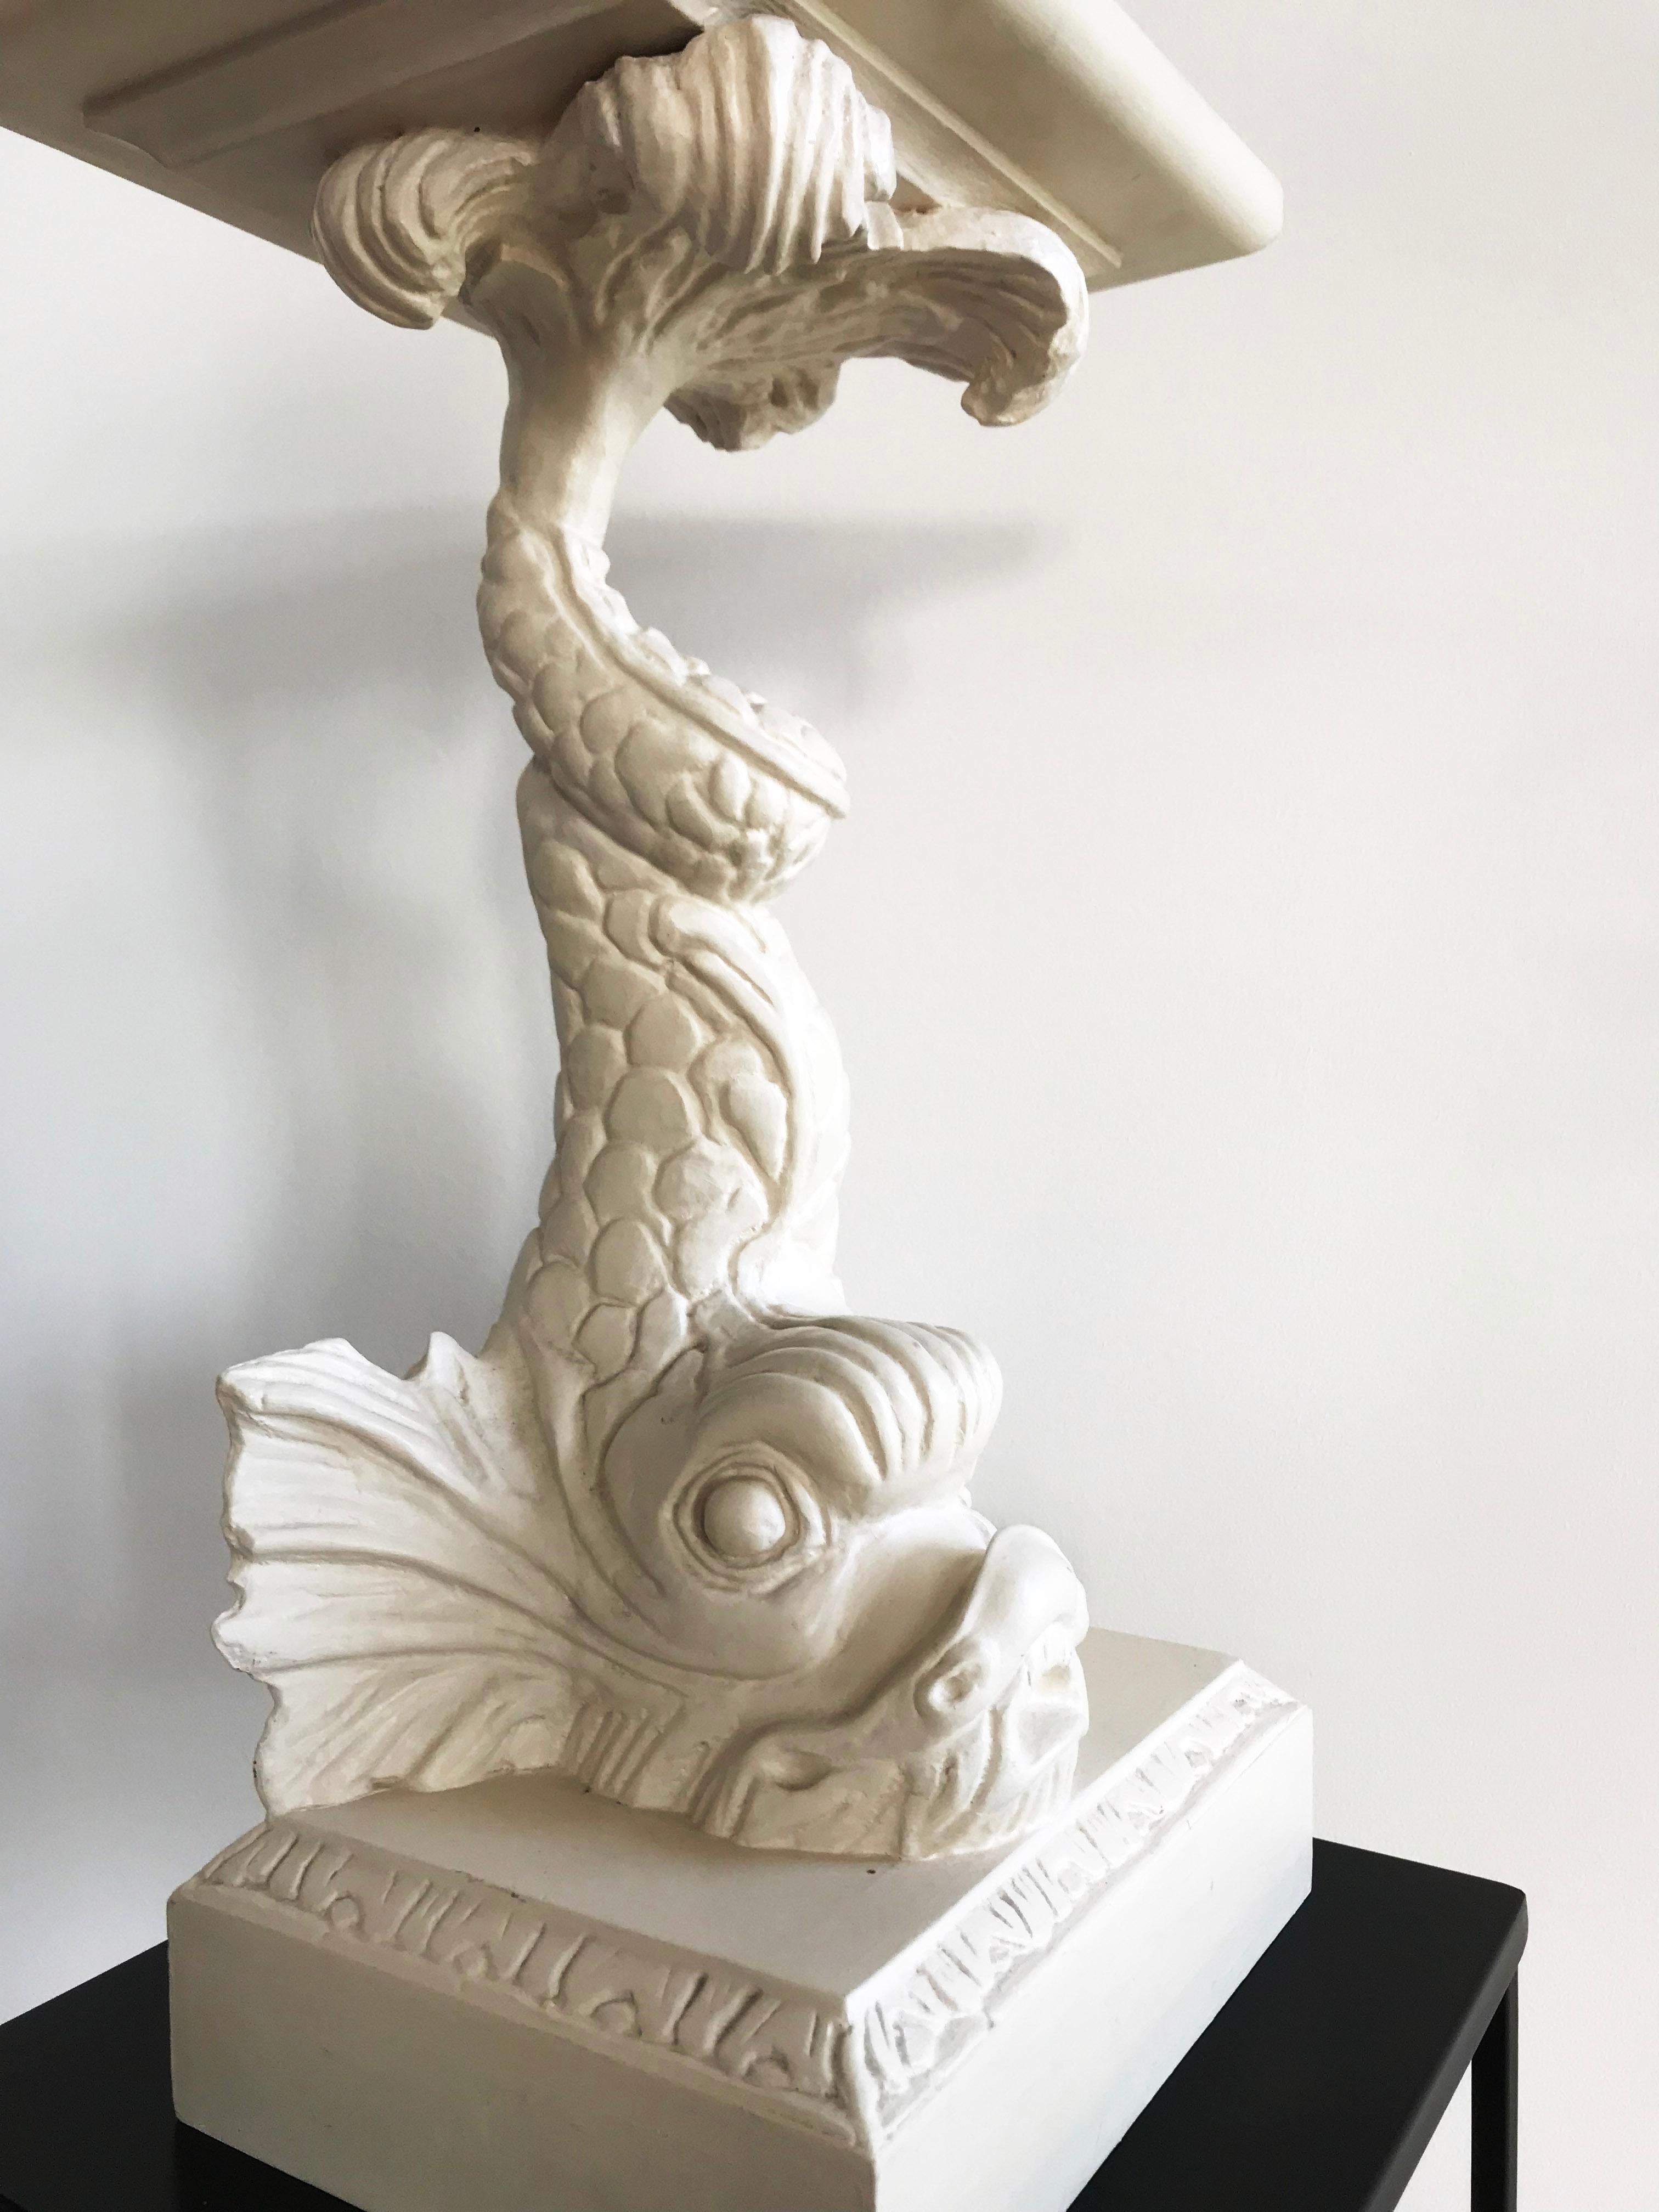 Hand-Carved Wooden Plant Stand Sculpture Midcentury Koi Fish White Side Table Dolphin Candle